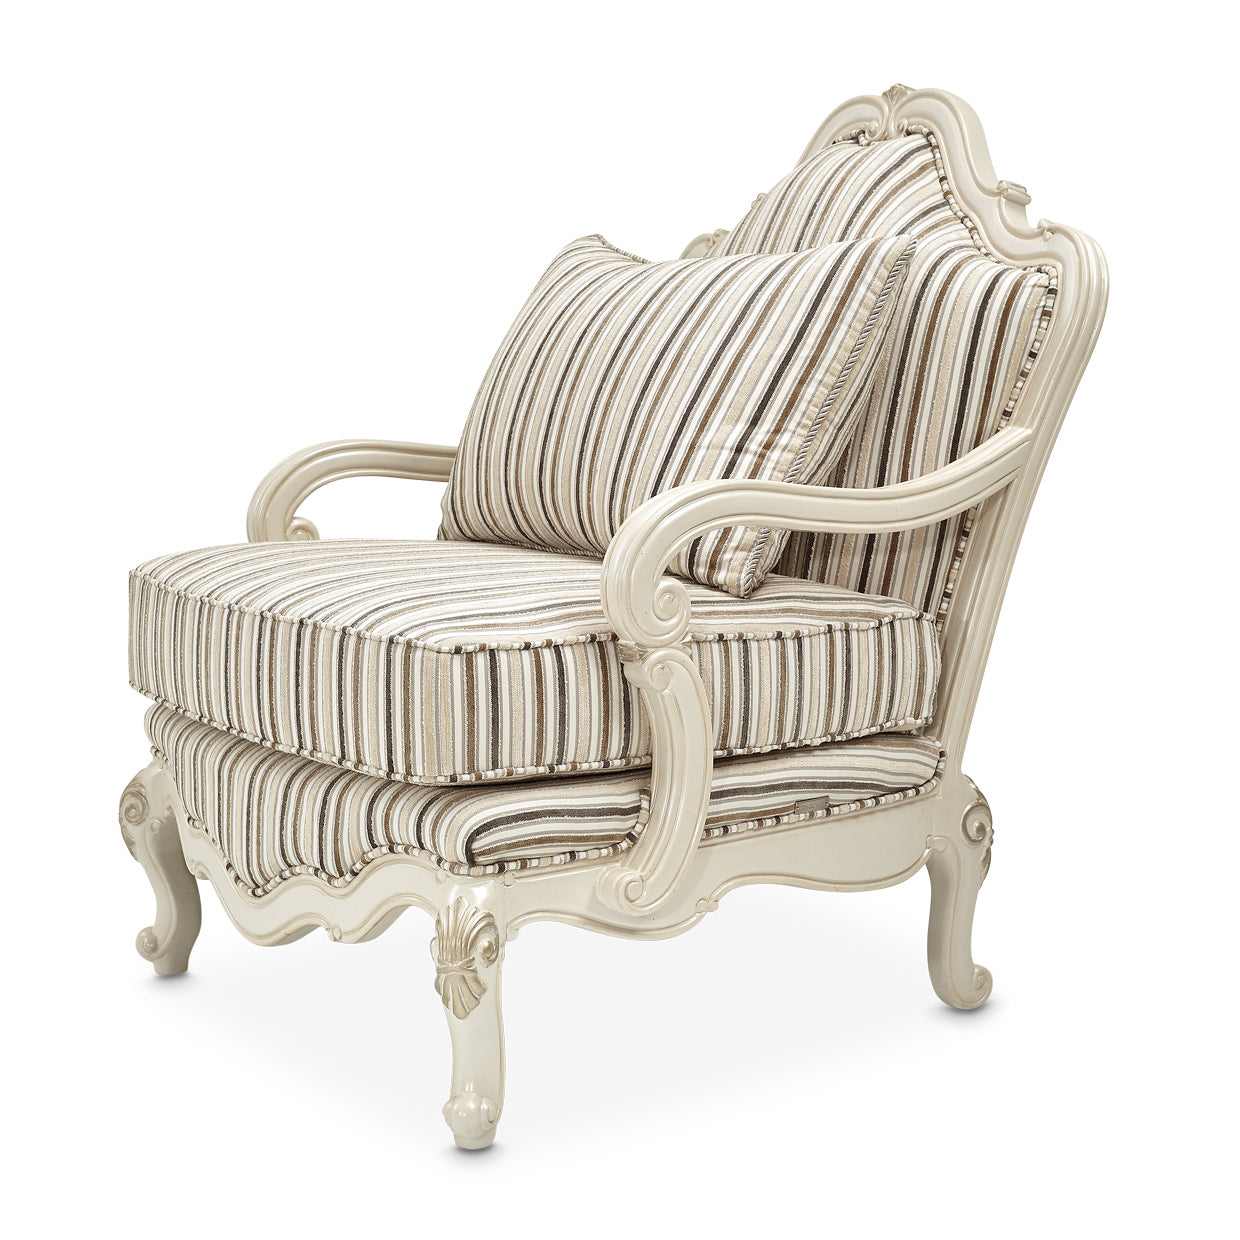 LAVELLE-CLASSIC PEARL Lavelle Bergere Wood Chair Birch Classic Pearl - Dream art Gallery